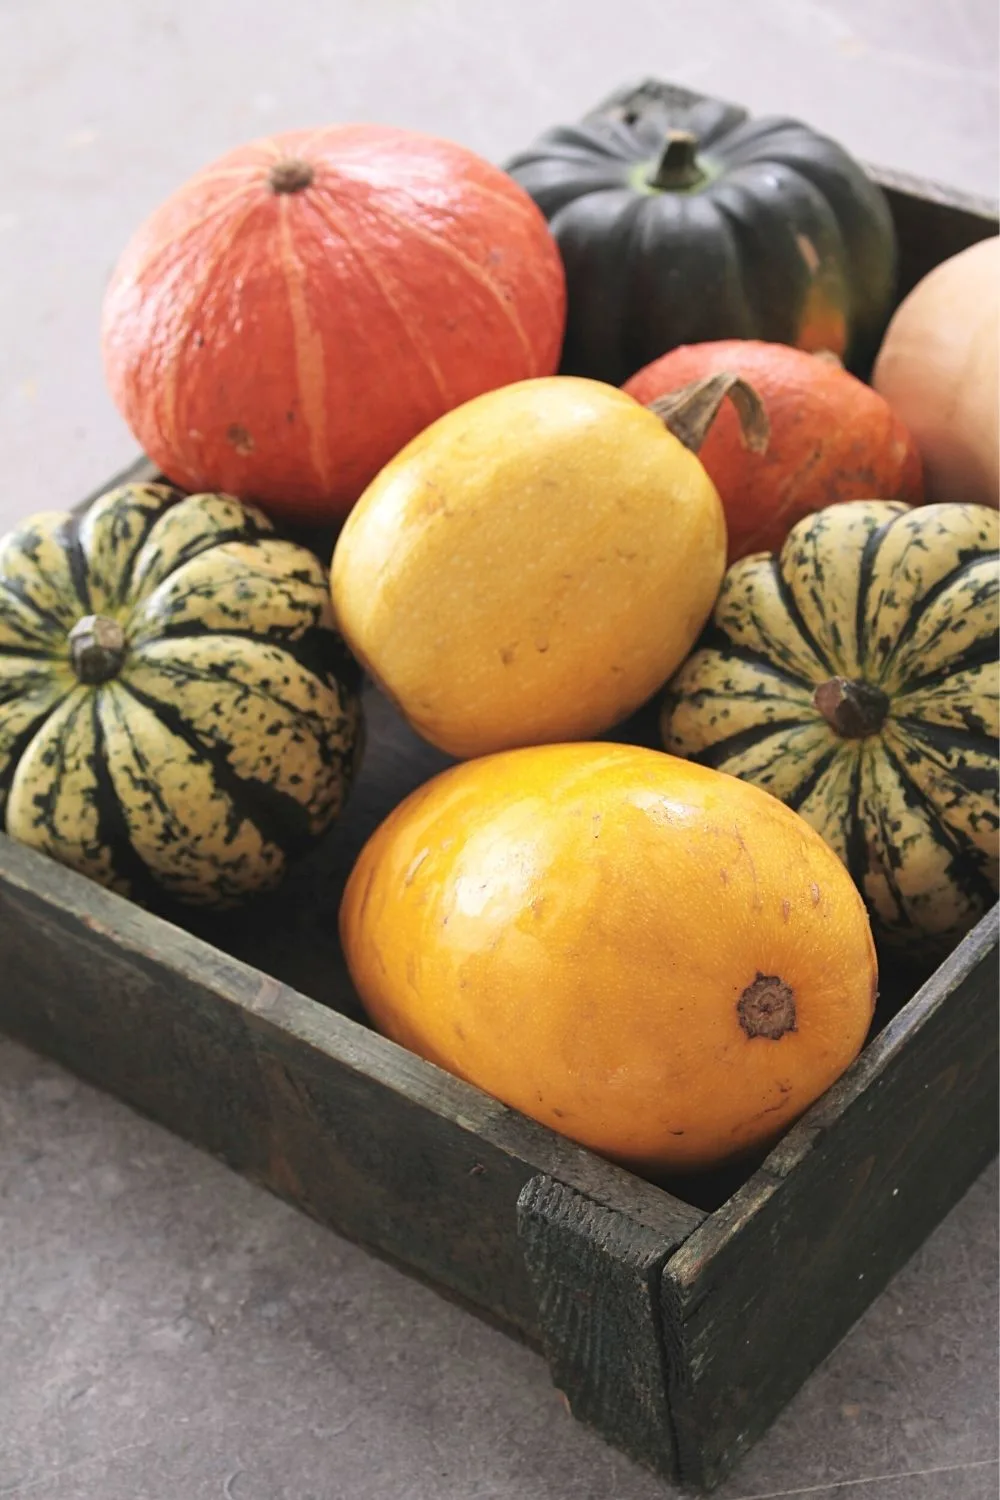 Squash is a highly-nutritious vegetable that you can easily grow on a south-facing balcony